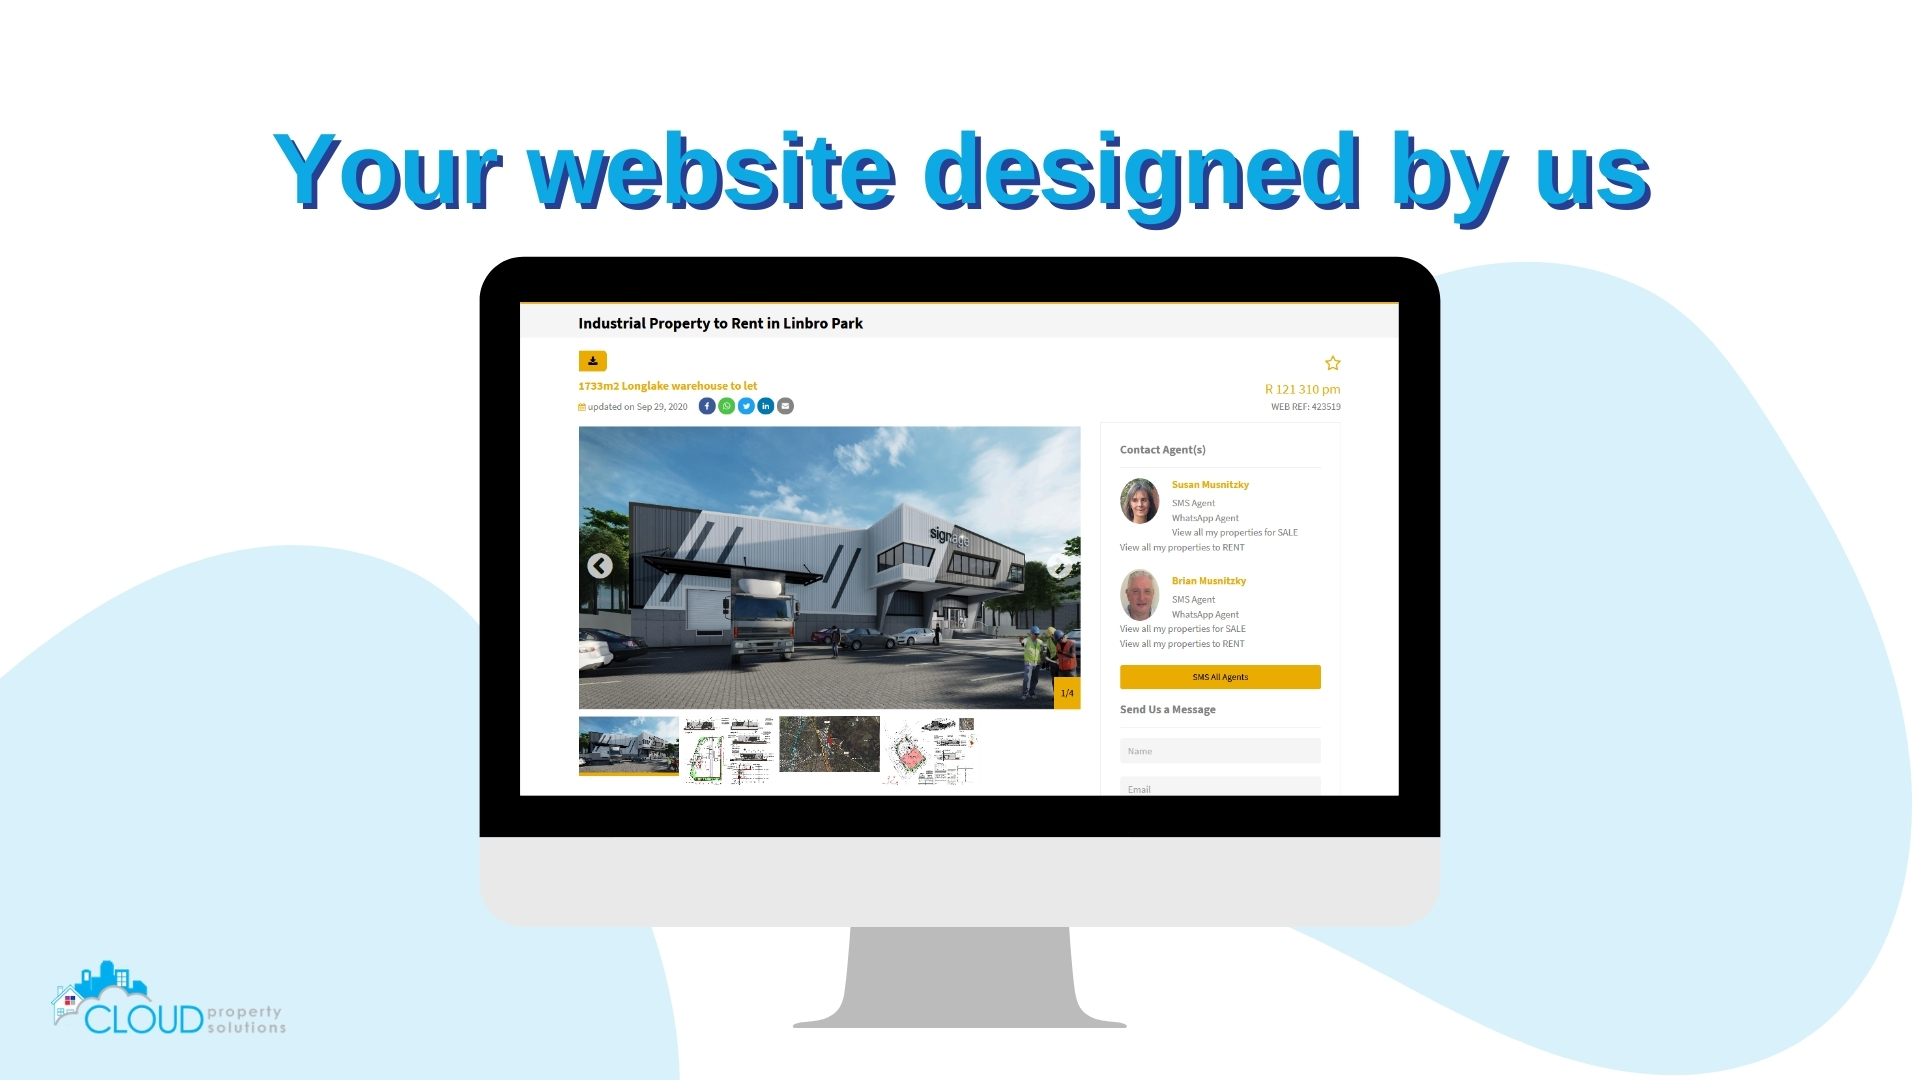 Manage listings on your website designed by us